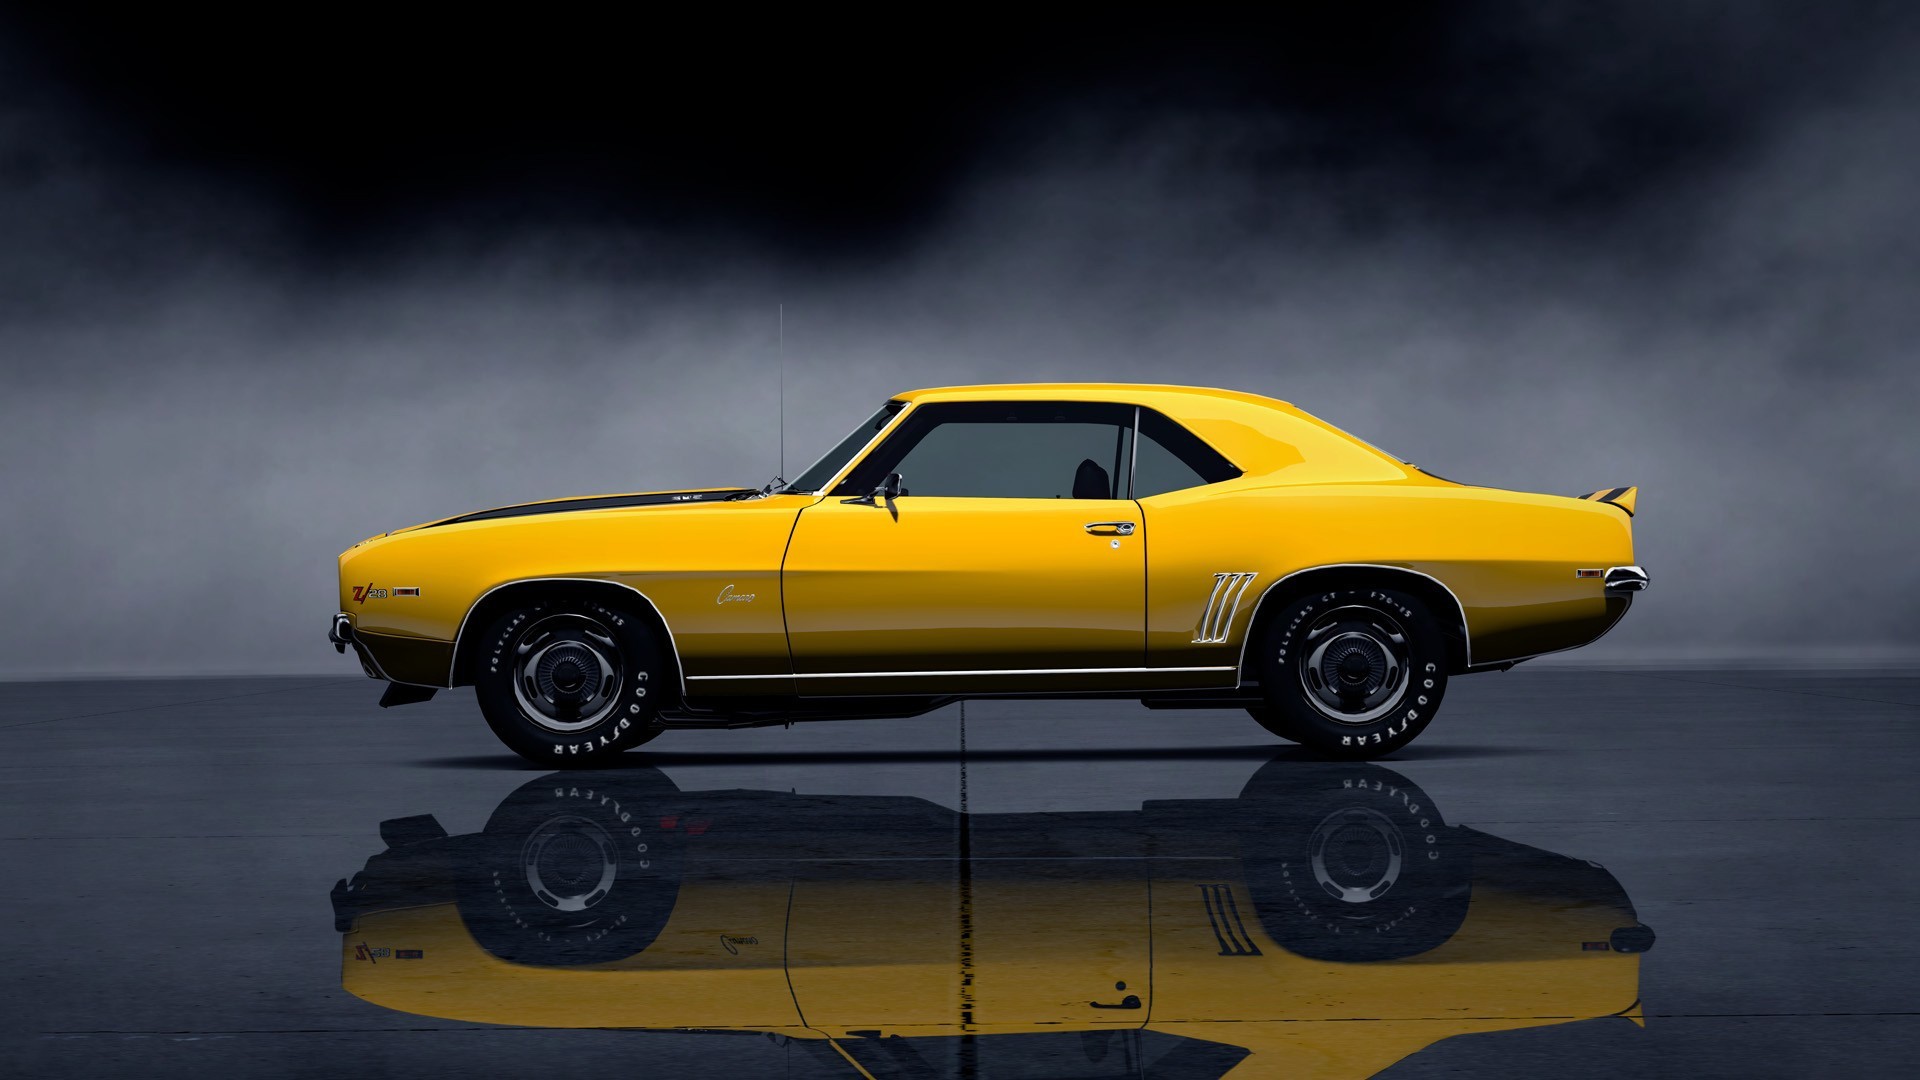 1920x1080 ... chevy car racing camro hd wallpaper download chevy car images free ...